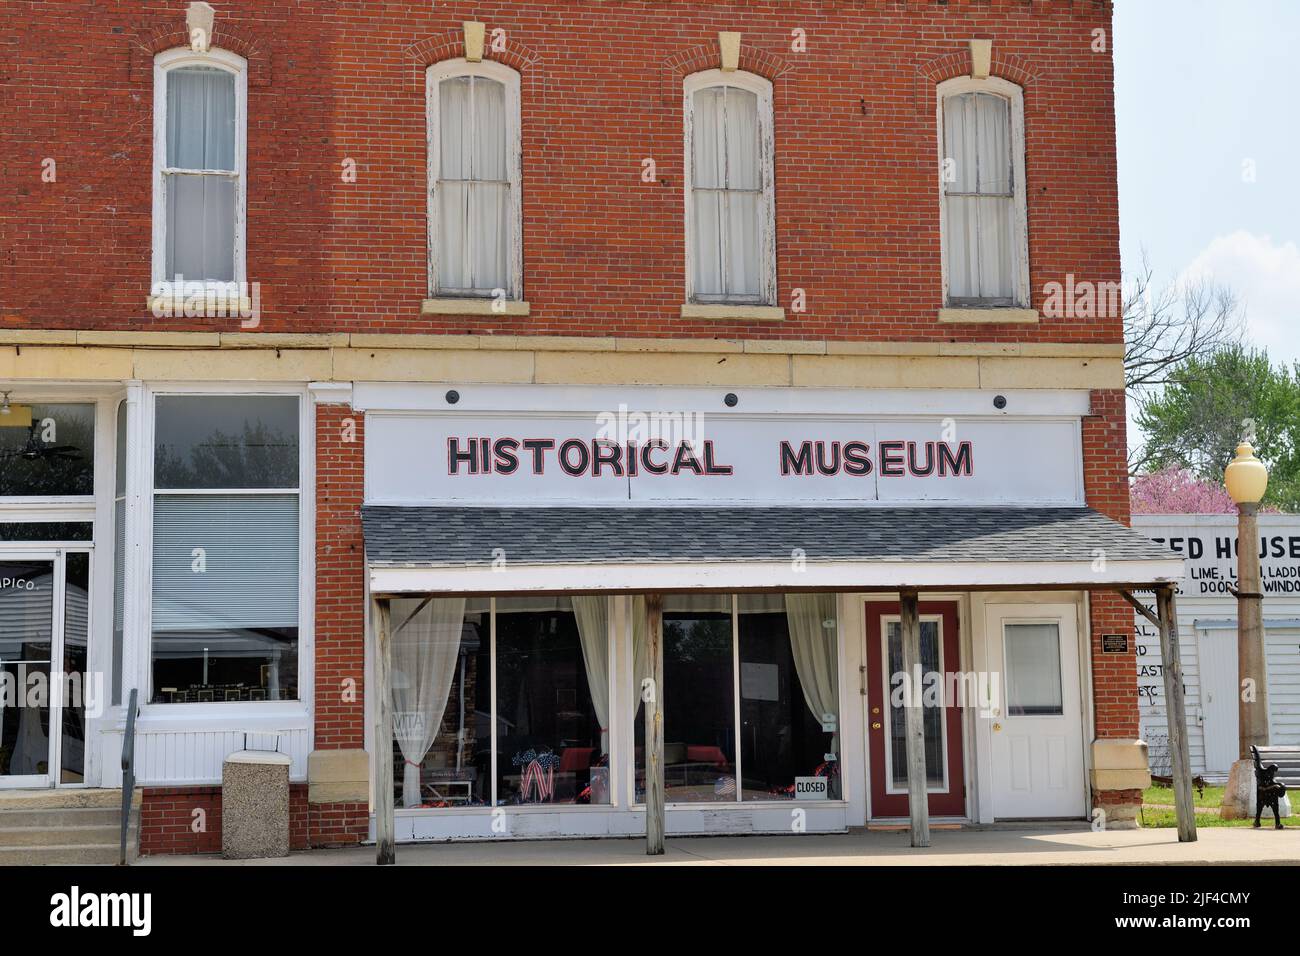 Tampico, Illinois, USA. The Historical Museum in the very small Illinois community whose main claim to fame is being the birthplace of Ronald Reagan. Stock Photo